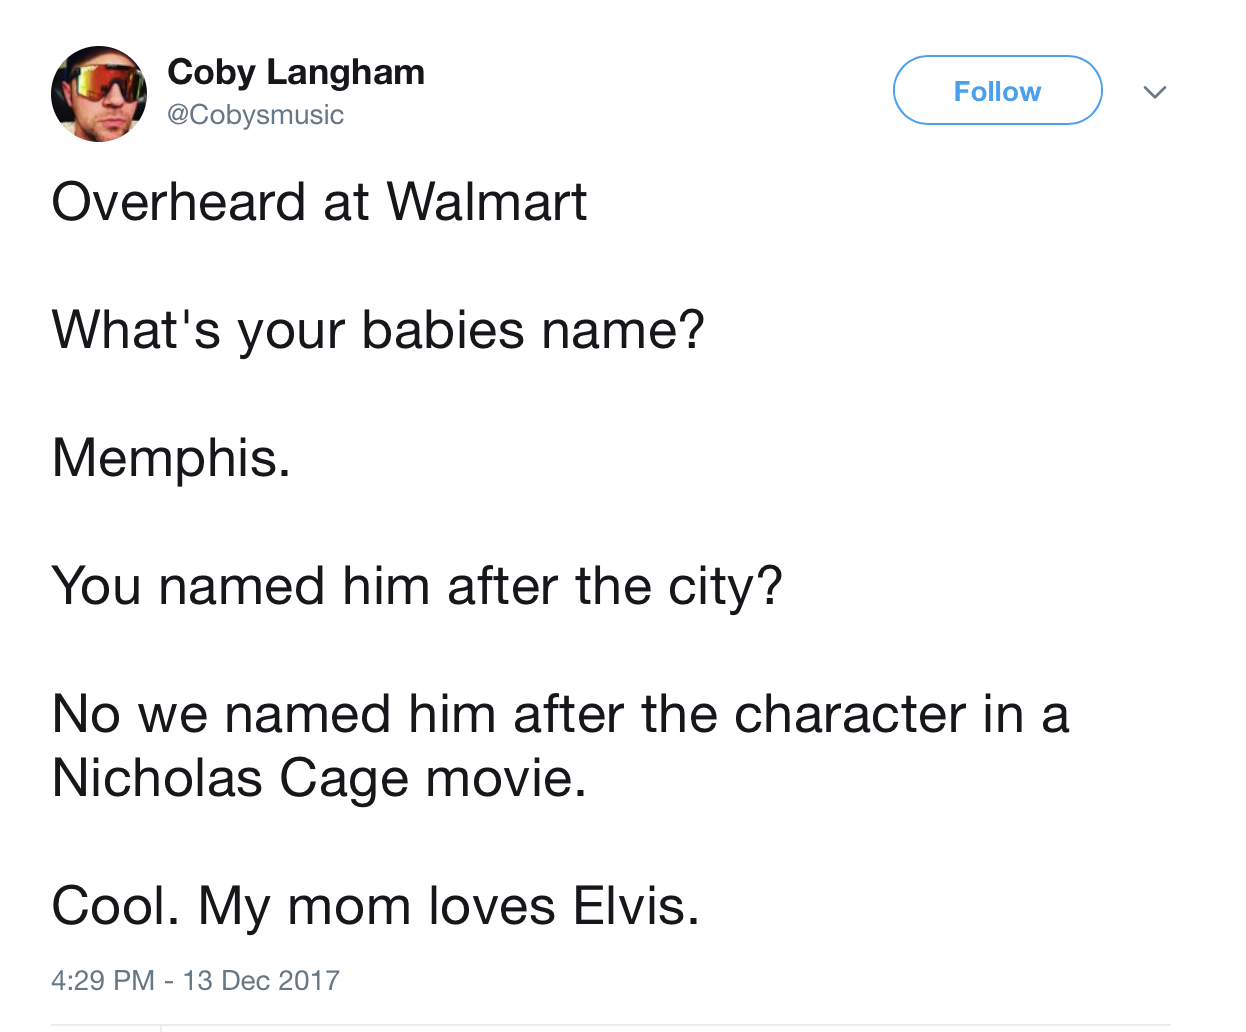 angle - Coby Langham Overheard at Walmart What's your babies name? Memphis. You named him after the city? No we named him after the character in a Nicholas Cage movie. Cool. My mom loves Elvis.